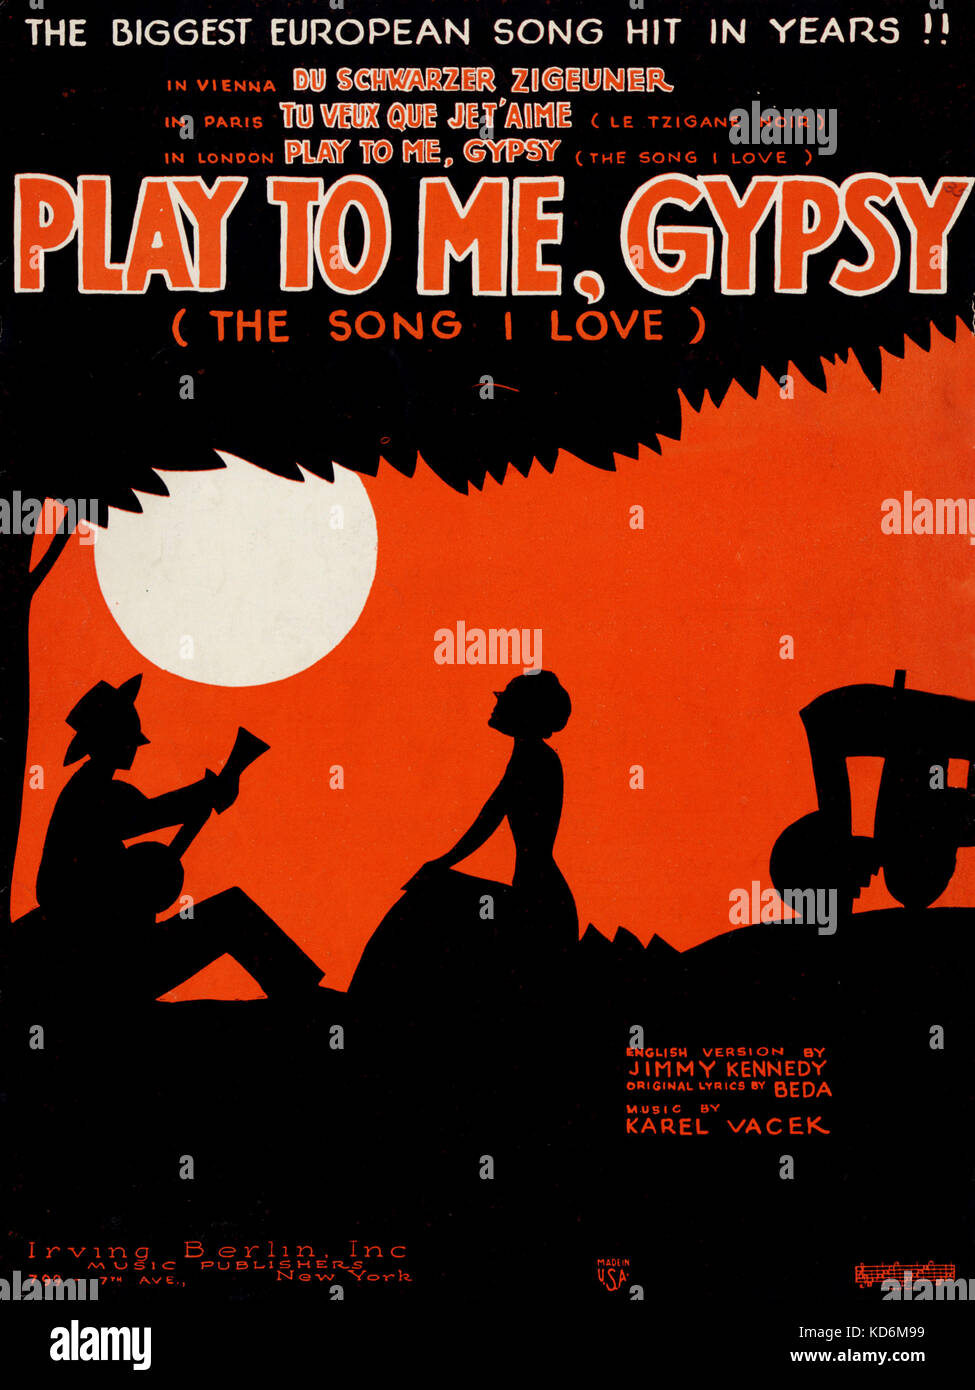 Score cover for the song 'Play to Me, Gypsy (the Song I Love)', 'Du Schwarzer Zigeuner', 'Tu Veux Que Je T'Aime (Le Tzigane Noir). Published by Irving Berlin, Inc., New York, 1932. Music by Karel Vacek.  Score cover showing gypsy encampment - silhouette of woman with man playing guitar under a moonlit sky. Stock Photo